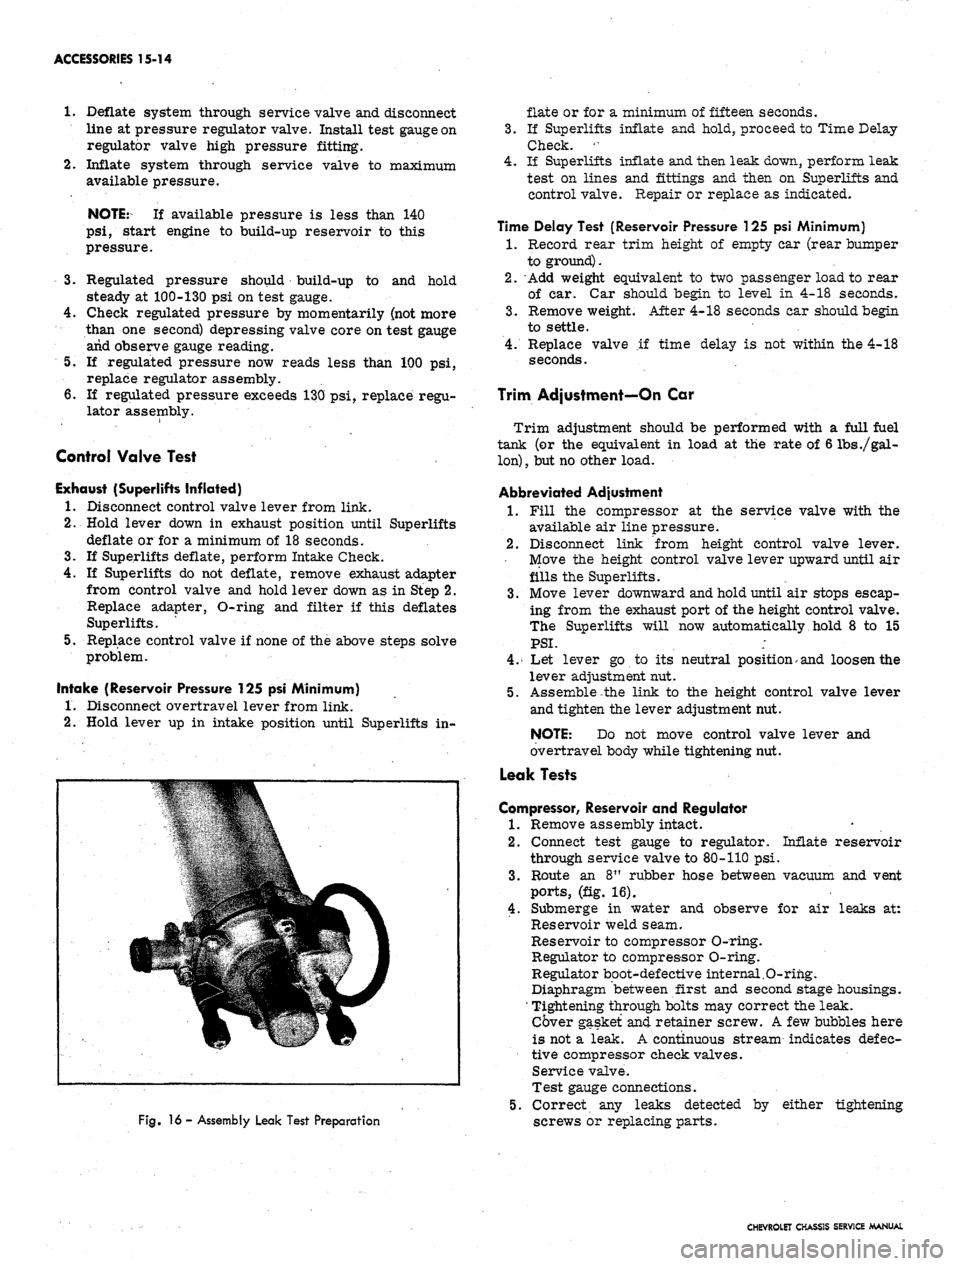 CHEVROLET CAMARO 1967 1.G Chassis Workshop Manual 
ACCESSORIES 15-14

Deflate system through service valve and disconnect

line at pressure regulator valve. Install test gauge on

regulator valve high pressure fitting.

Inflate system through service